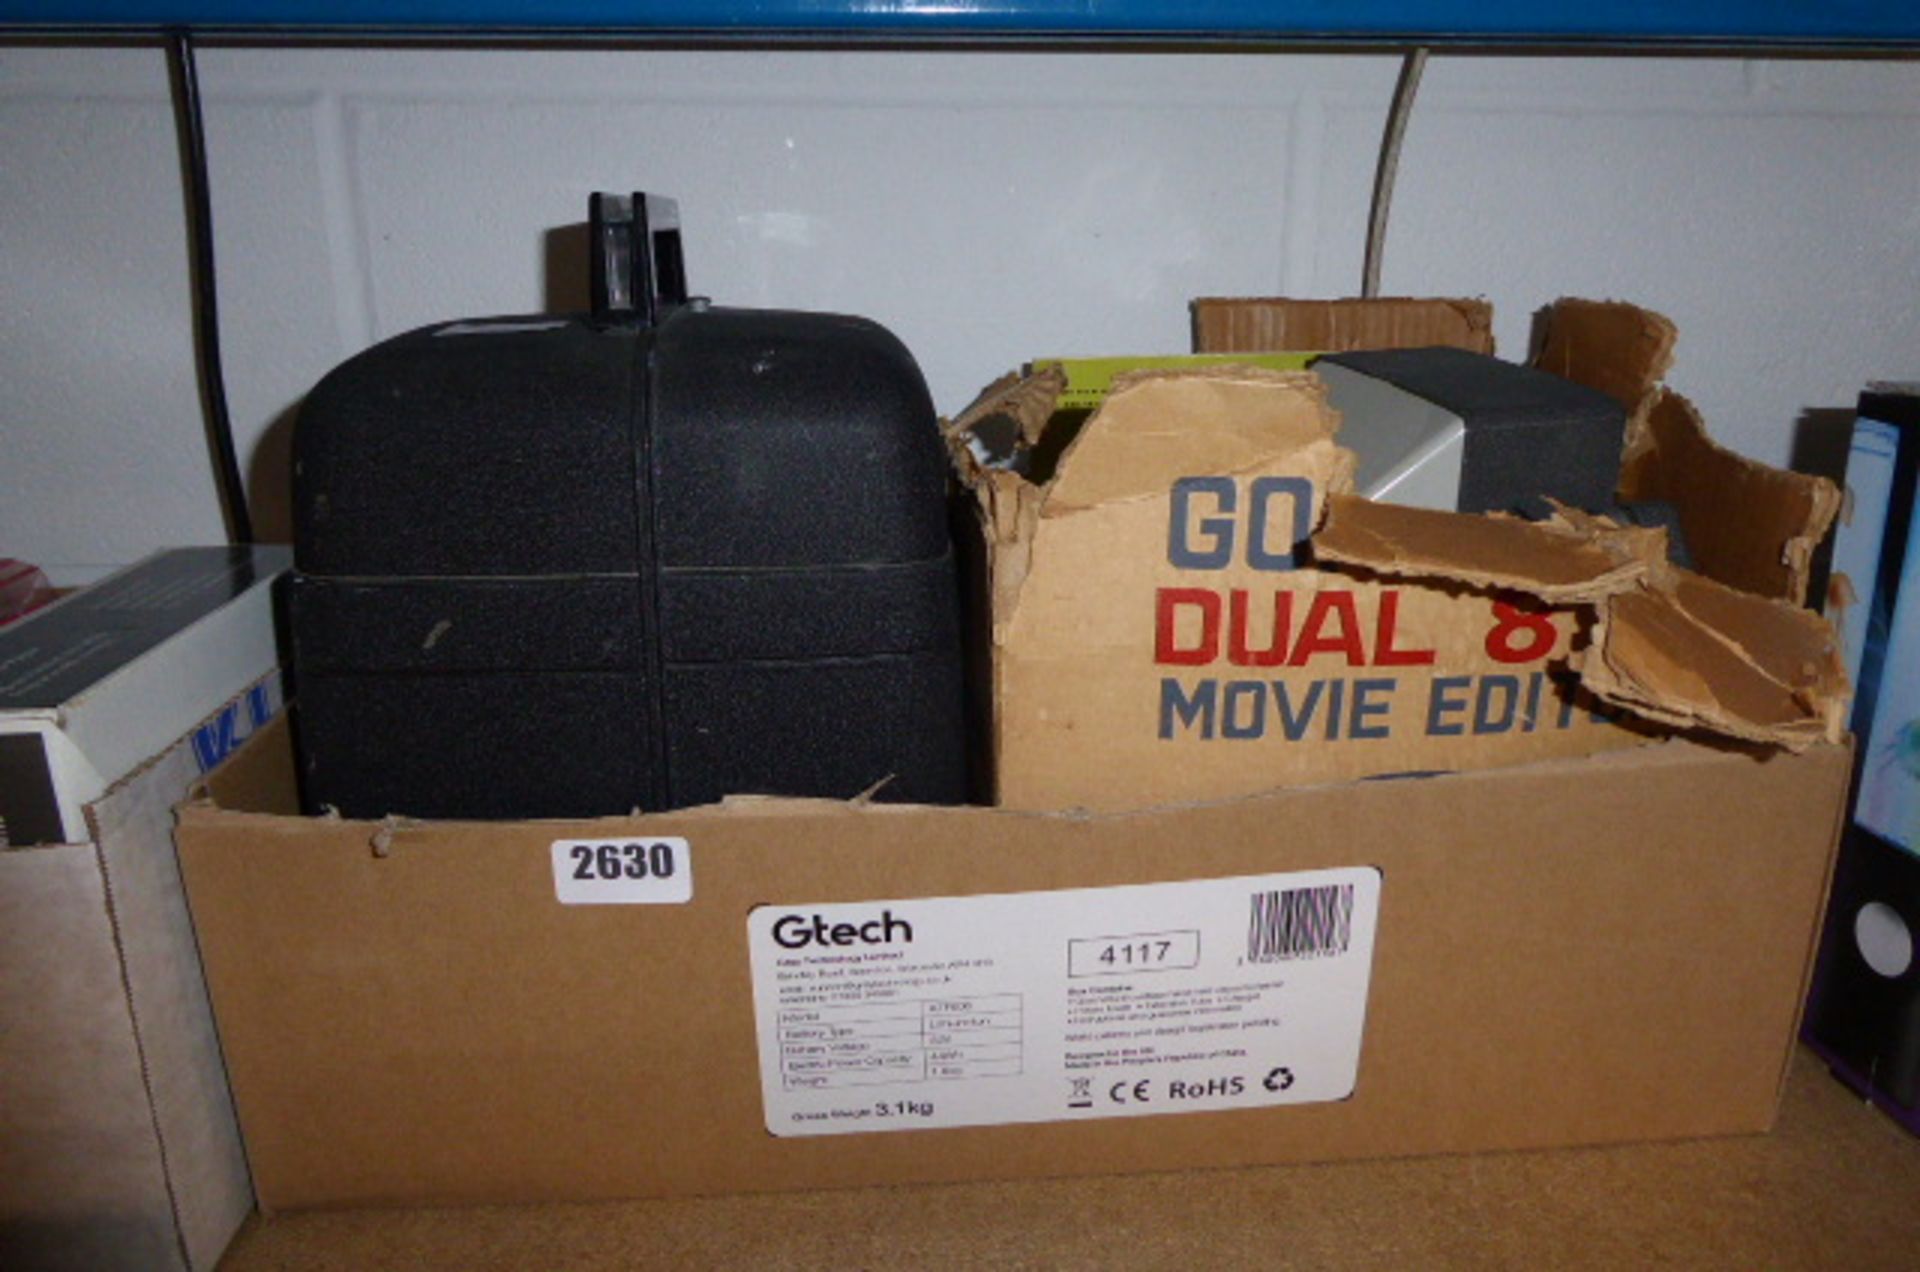 8mm cine film projector system in box